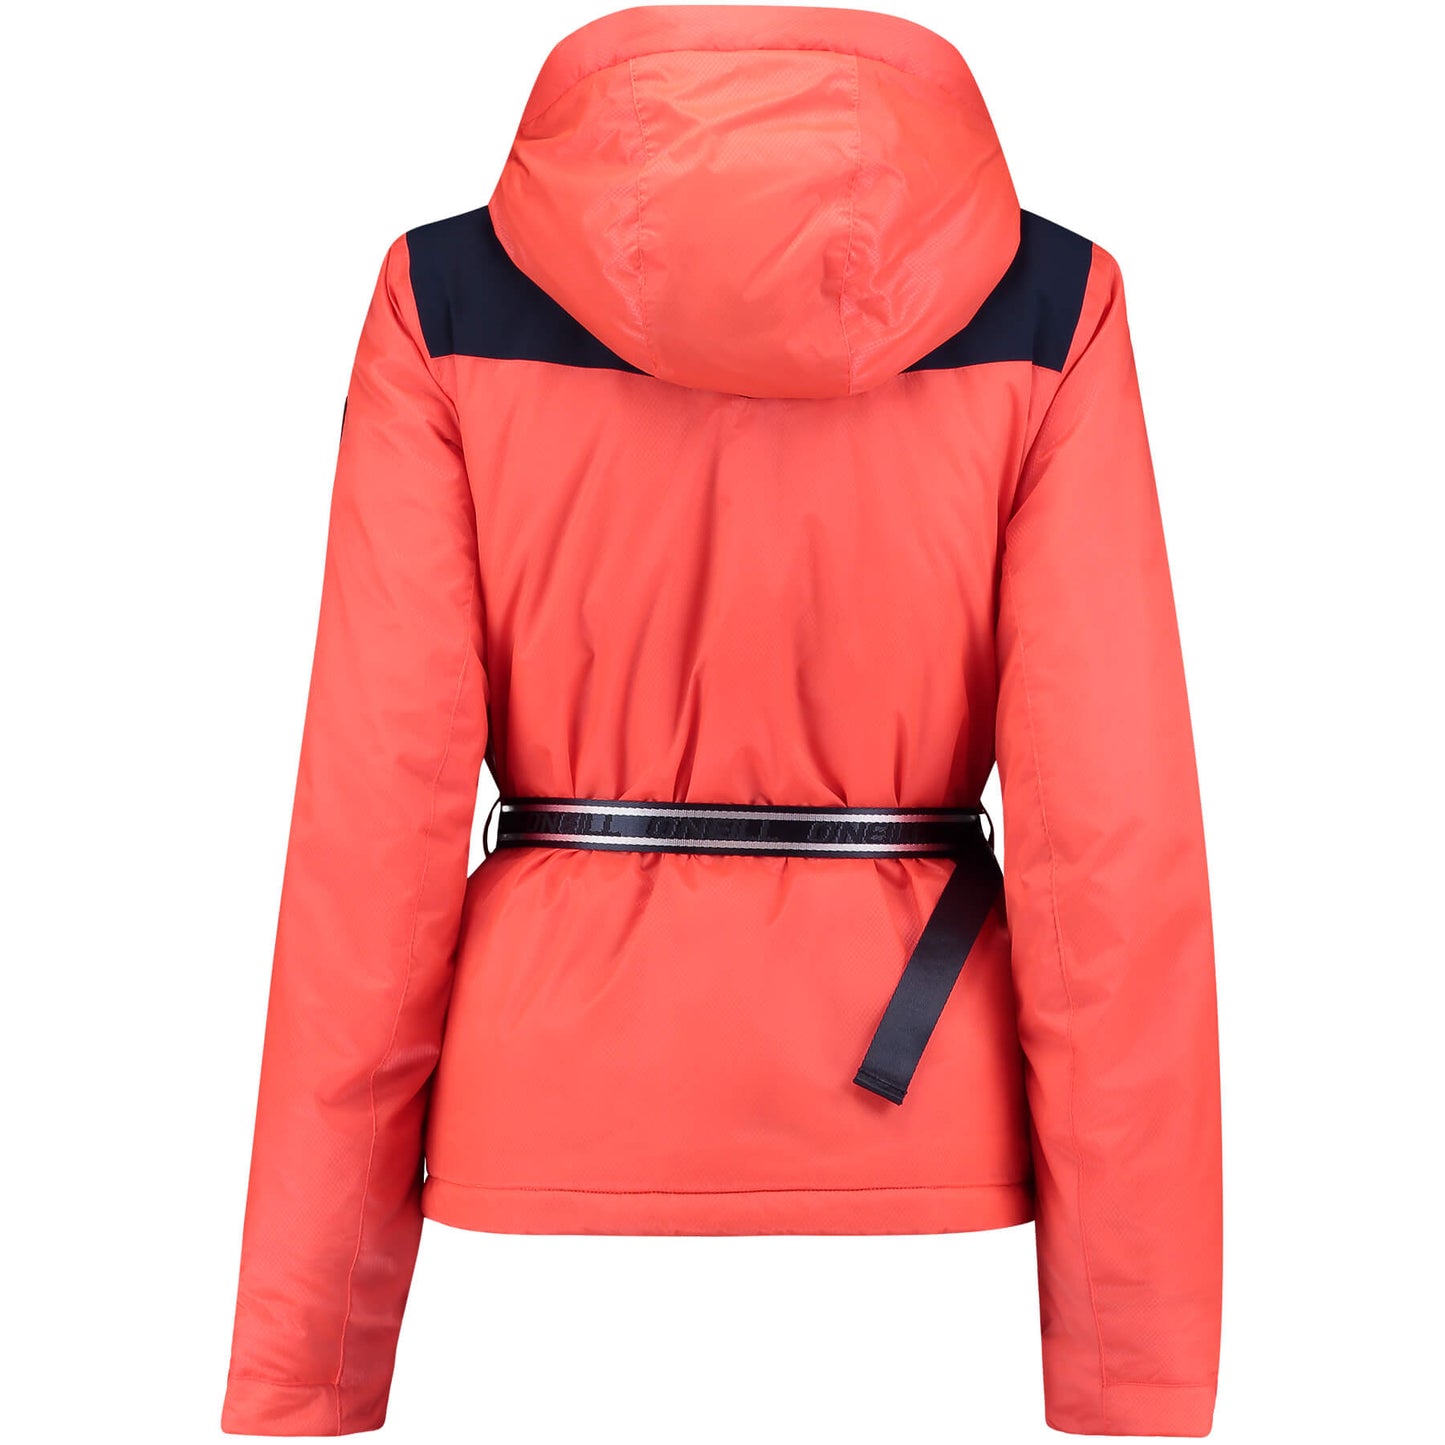 Womens Wels Snow Jacket - Fiery Coral